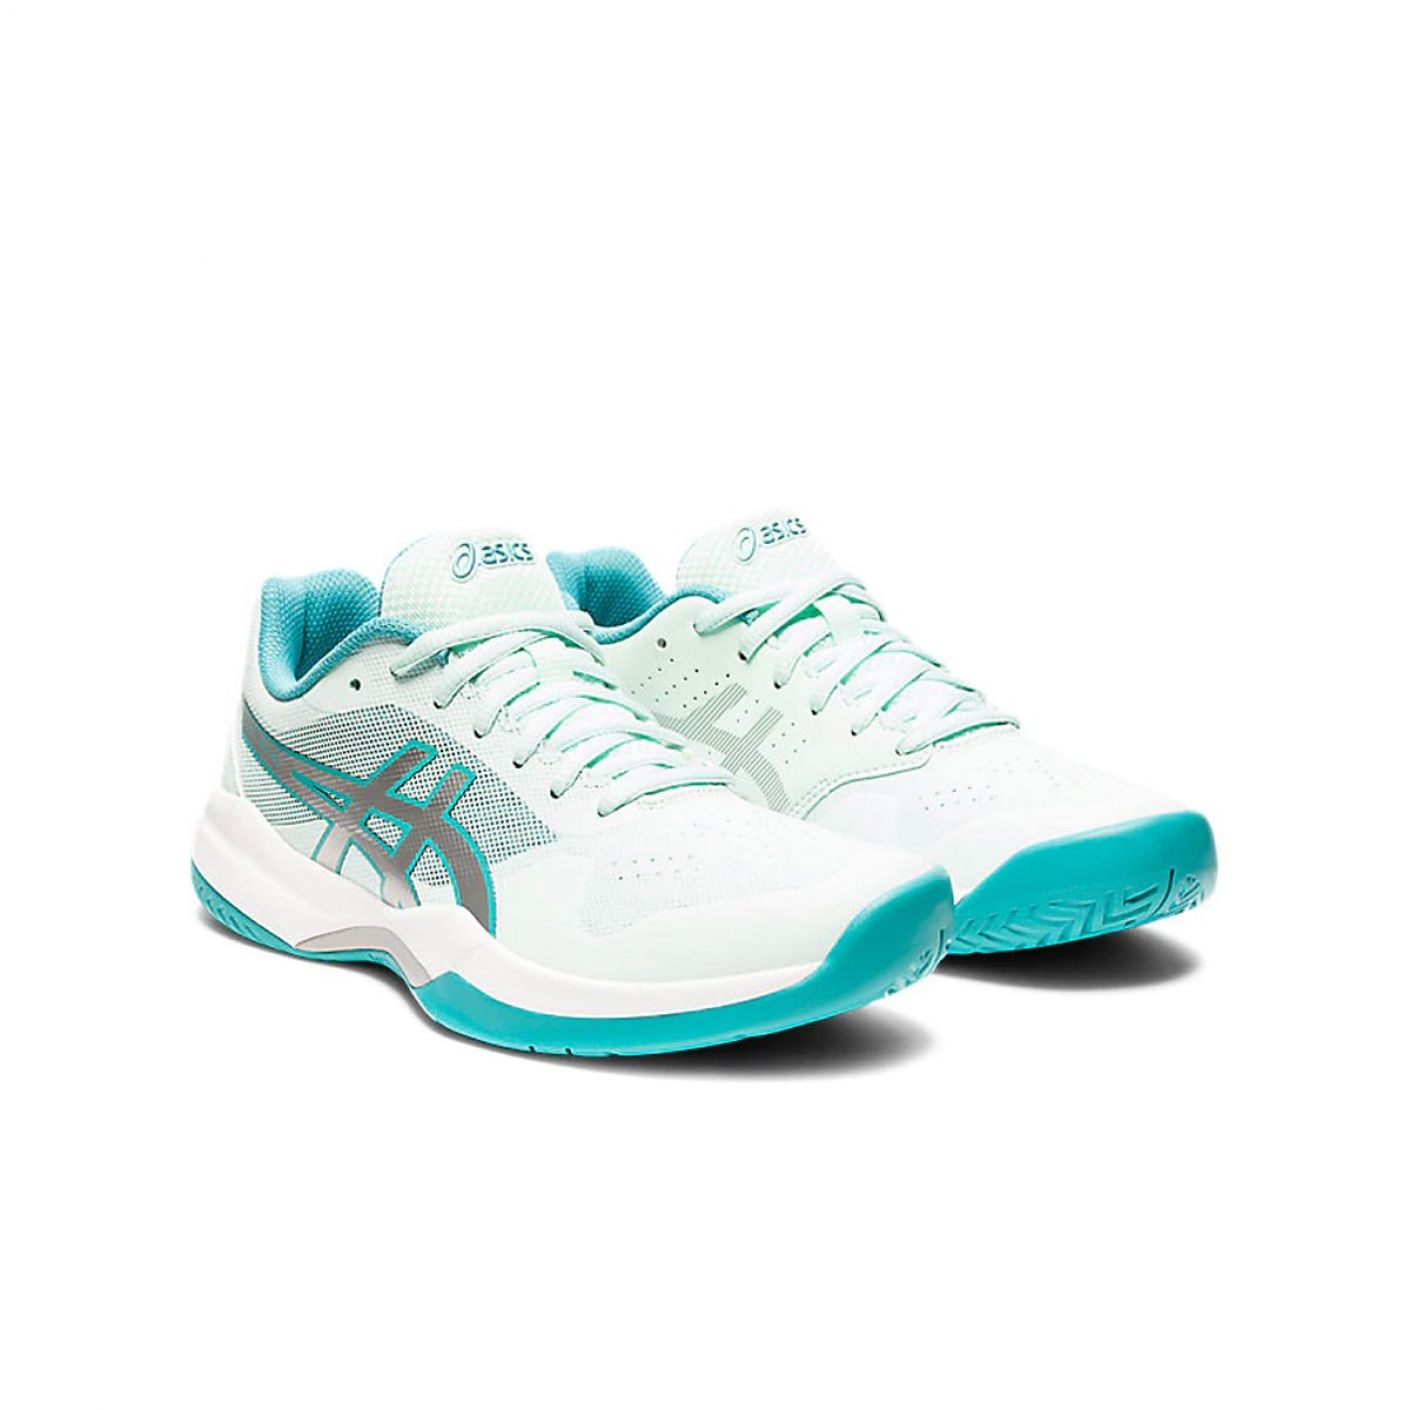 Asics Gel Game 7 Bio Mint Pure Silver for Women